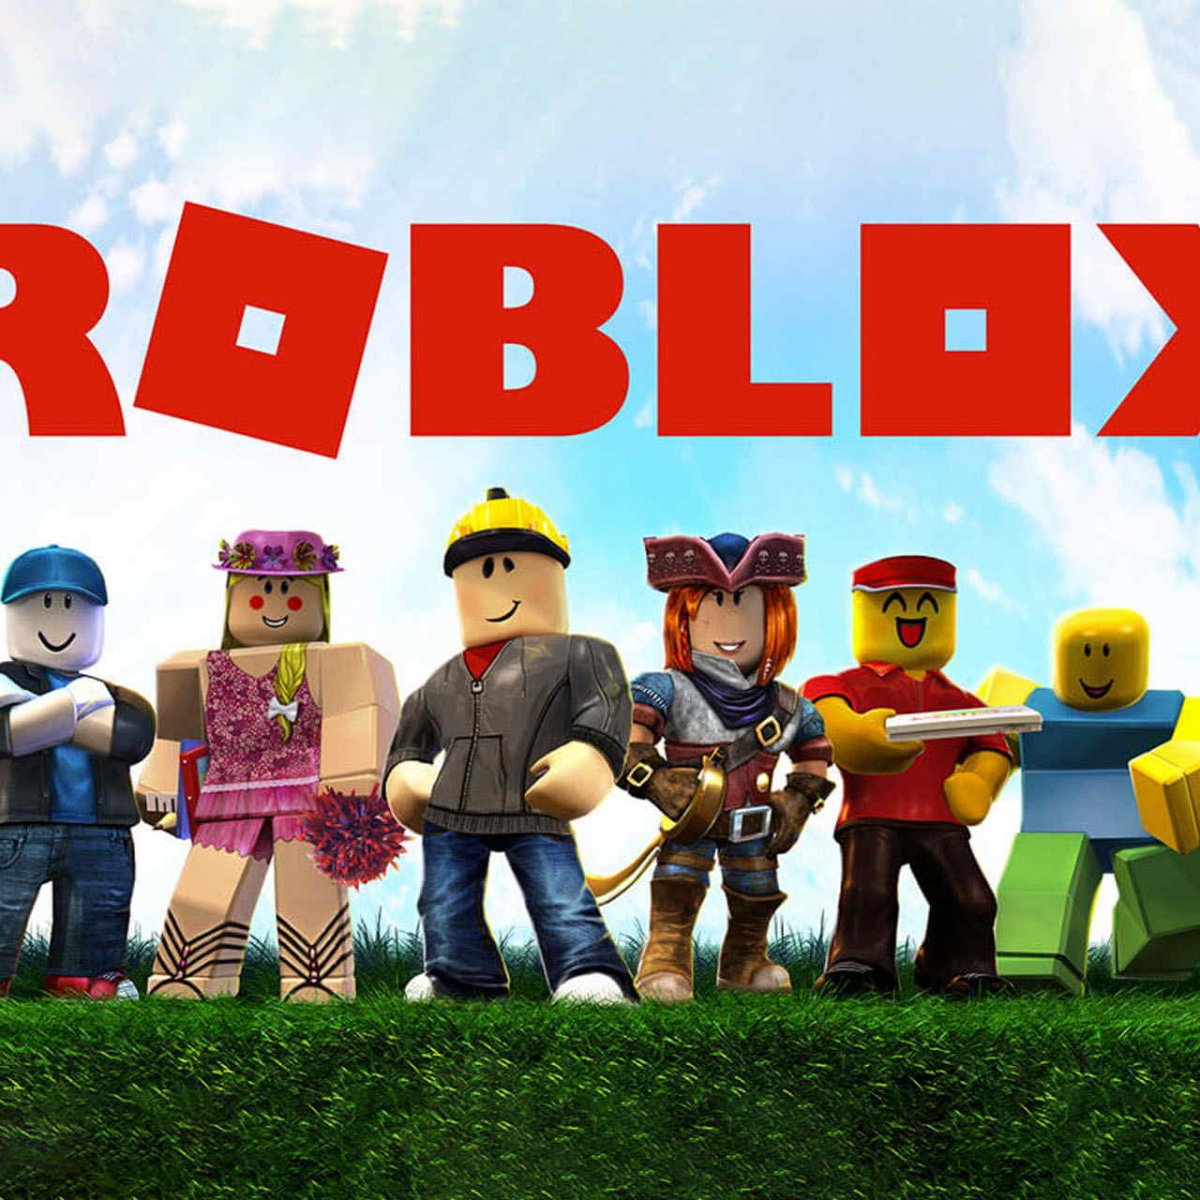 i5K on X: Made a new ROBLOX wallpaper, let me know what you think